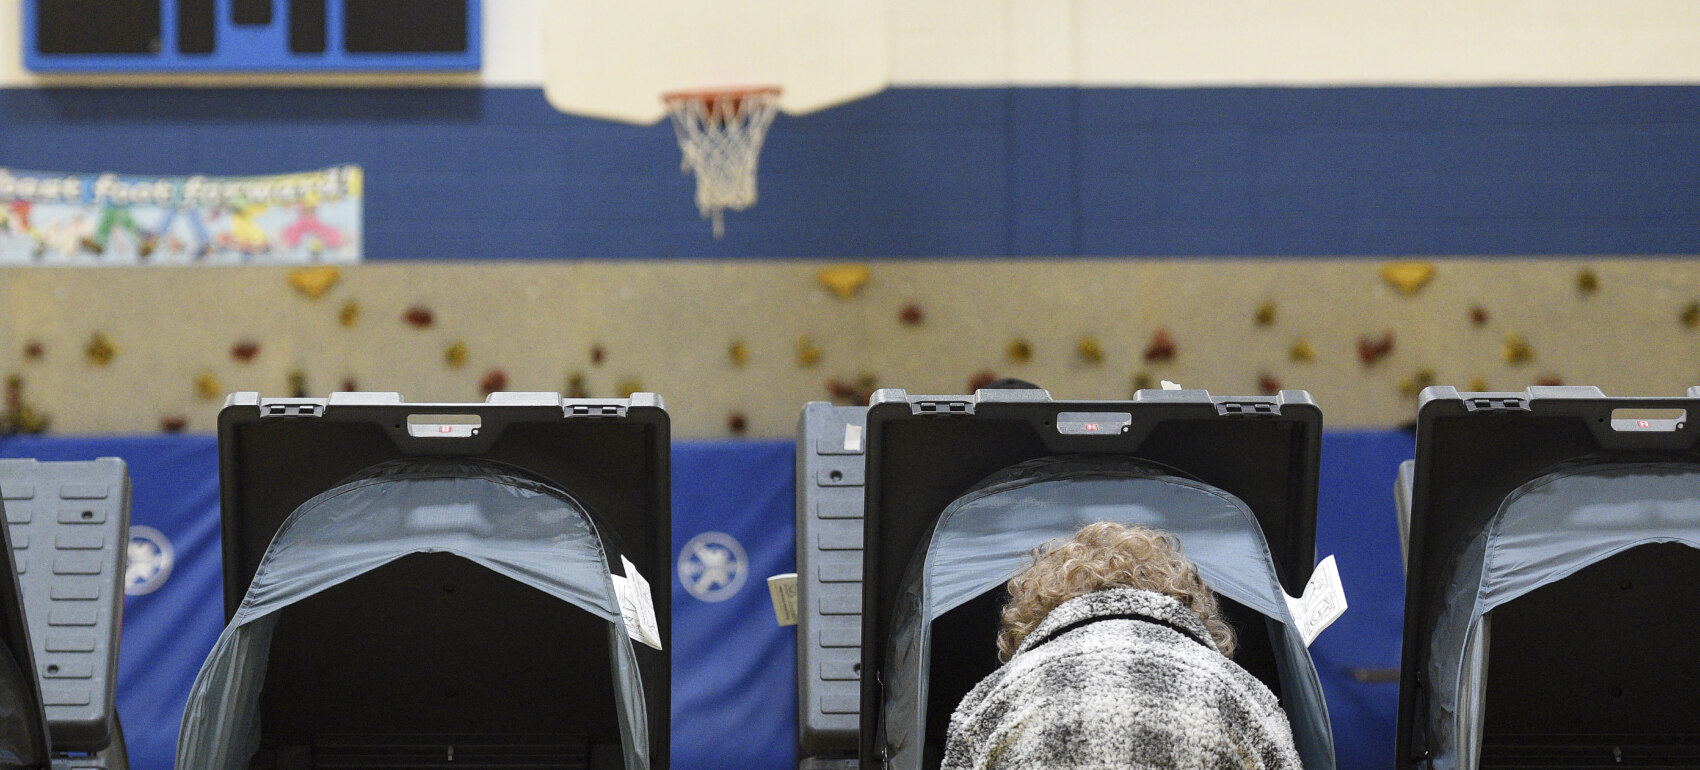 Primary voting begins in Illinois Here are howtos, FAQs